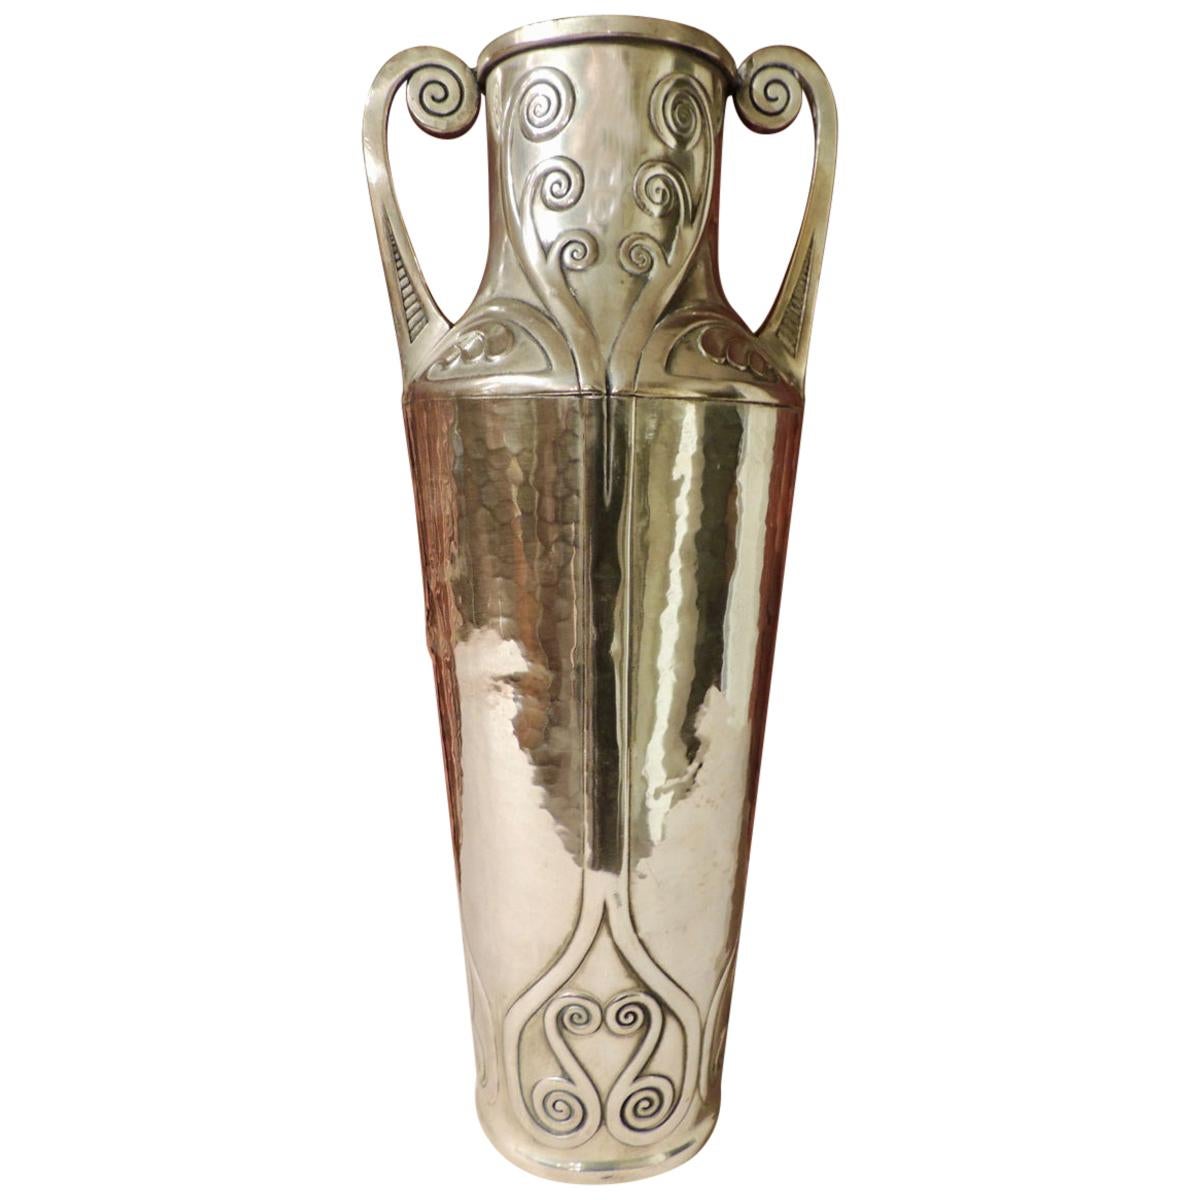 Art Nouveau Silver Vase with Hammered Details by Carl Deffner